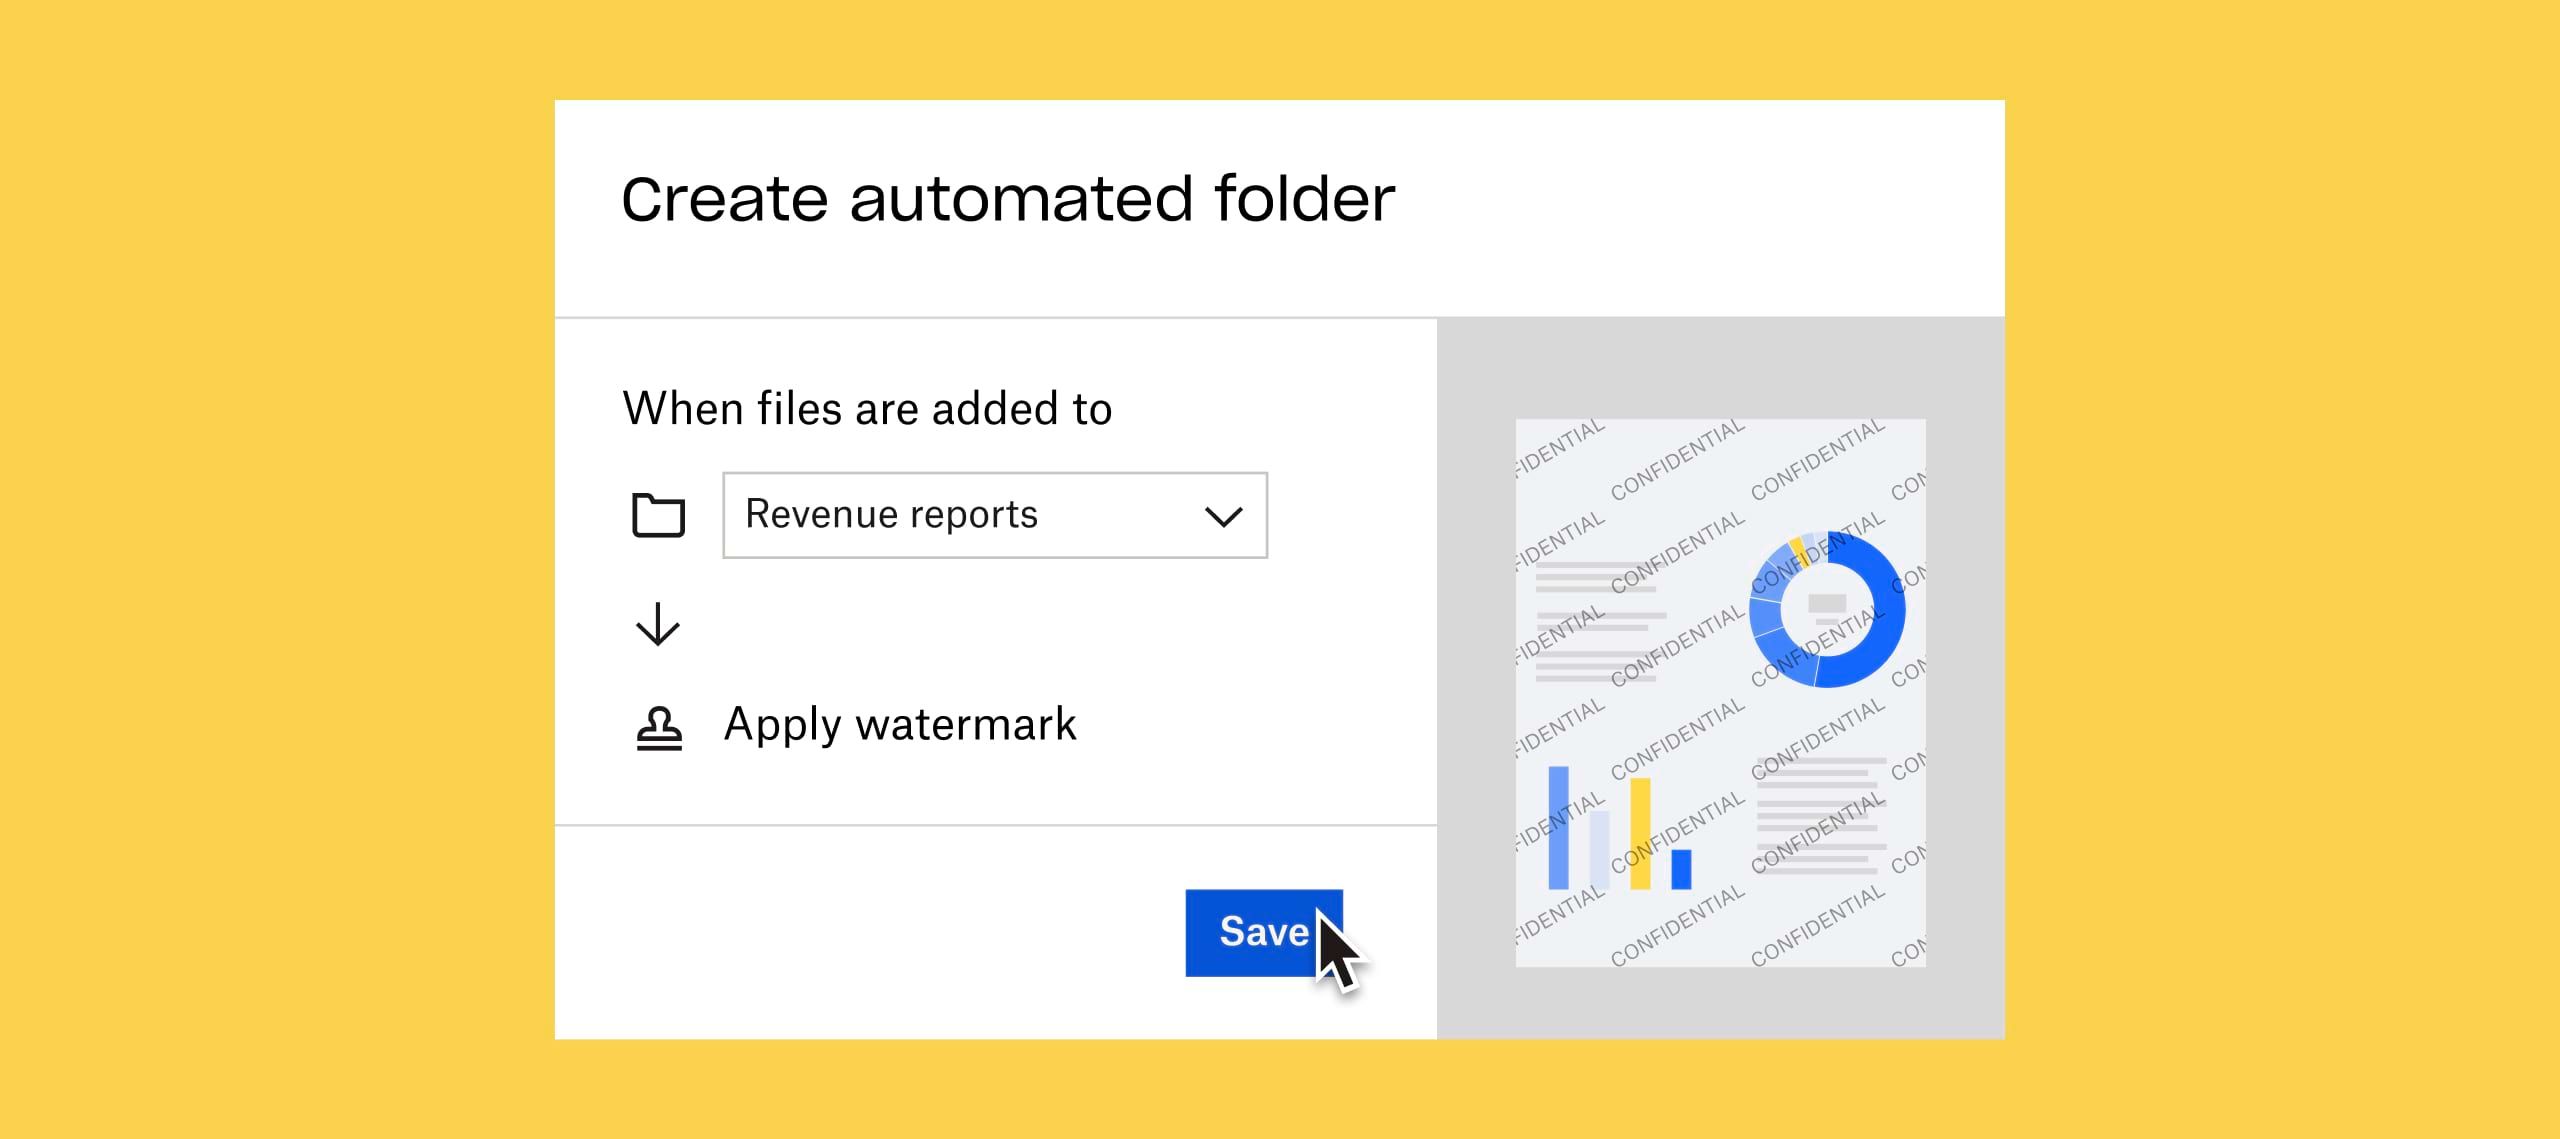 A user clicking a blue ‘save’ button to automatically apply a watermark to any document added to the ‘revenue reports’ folder